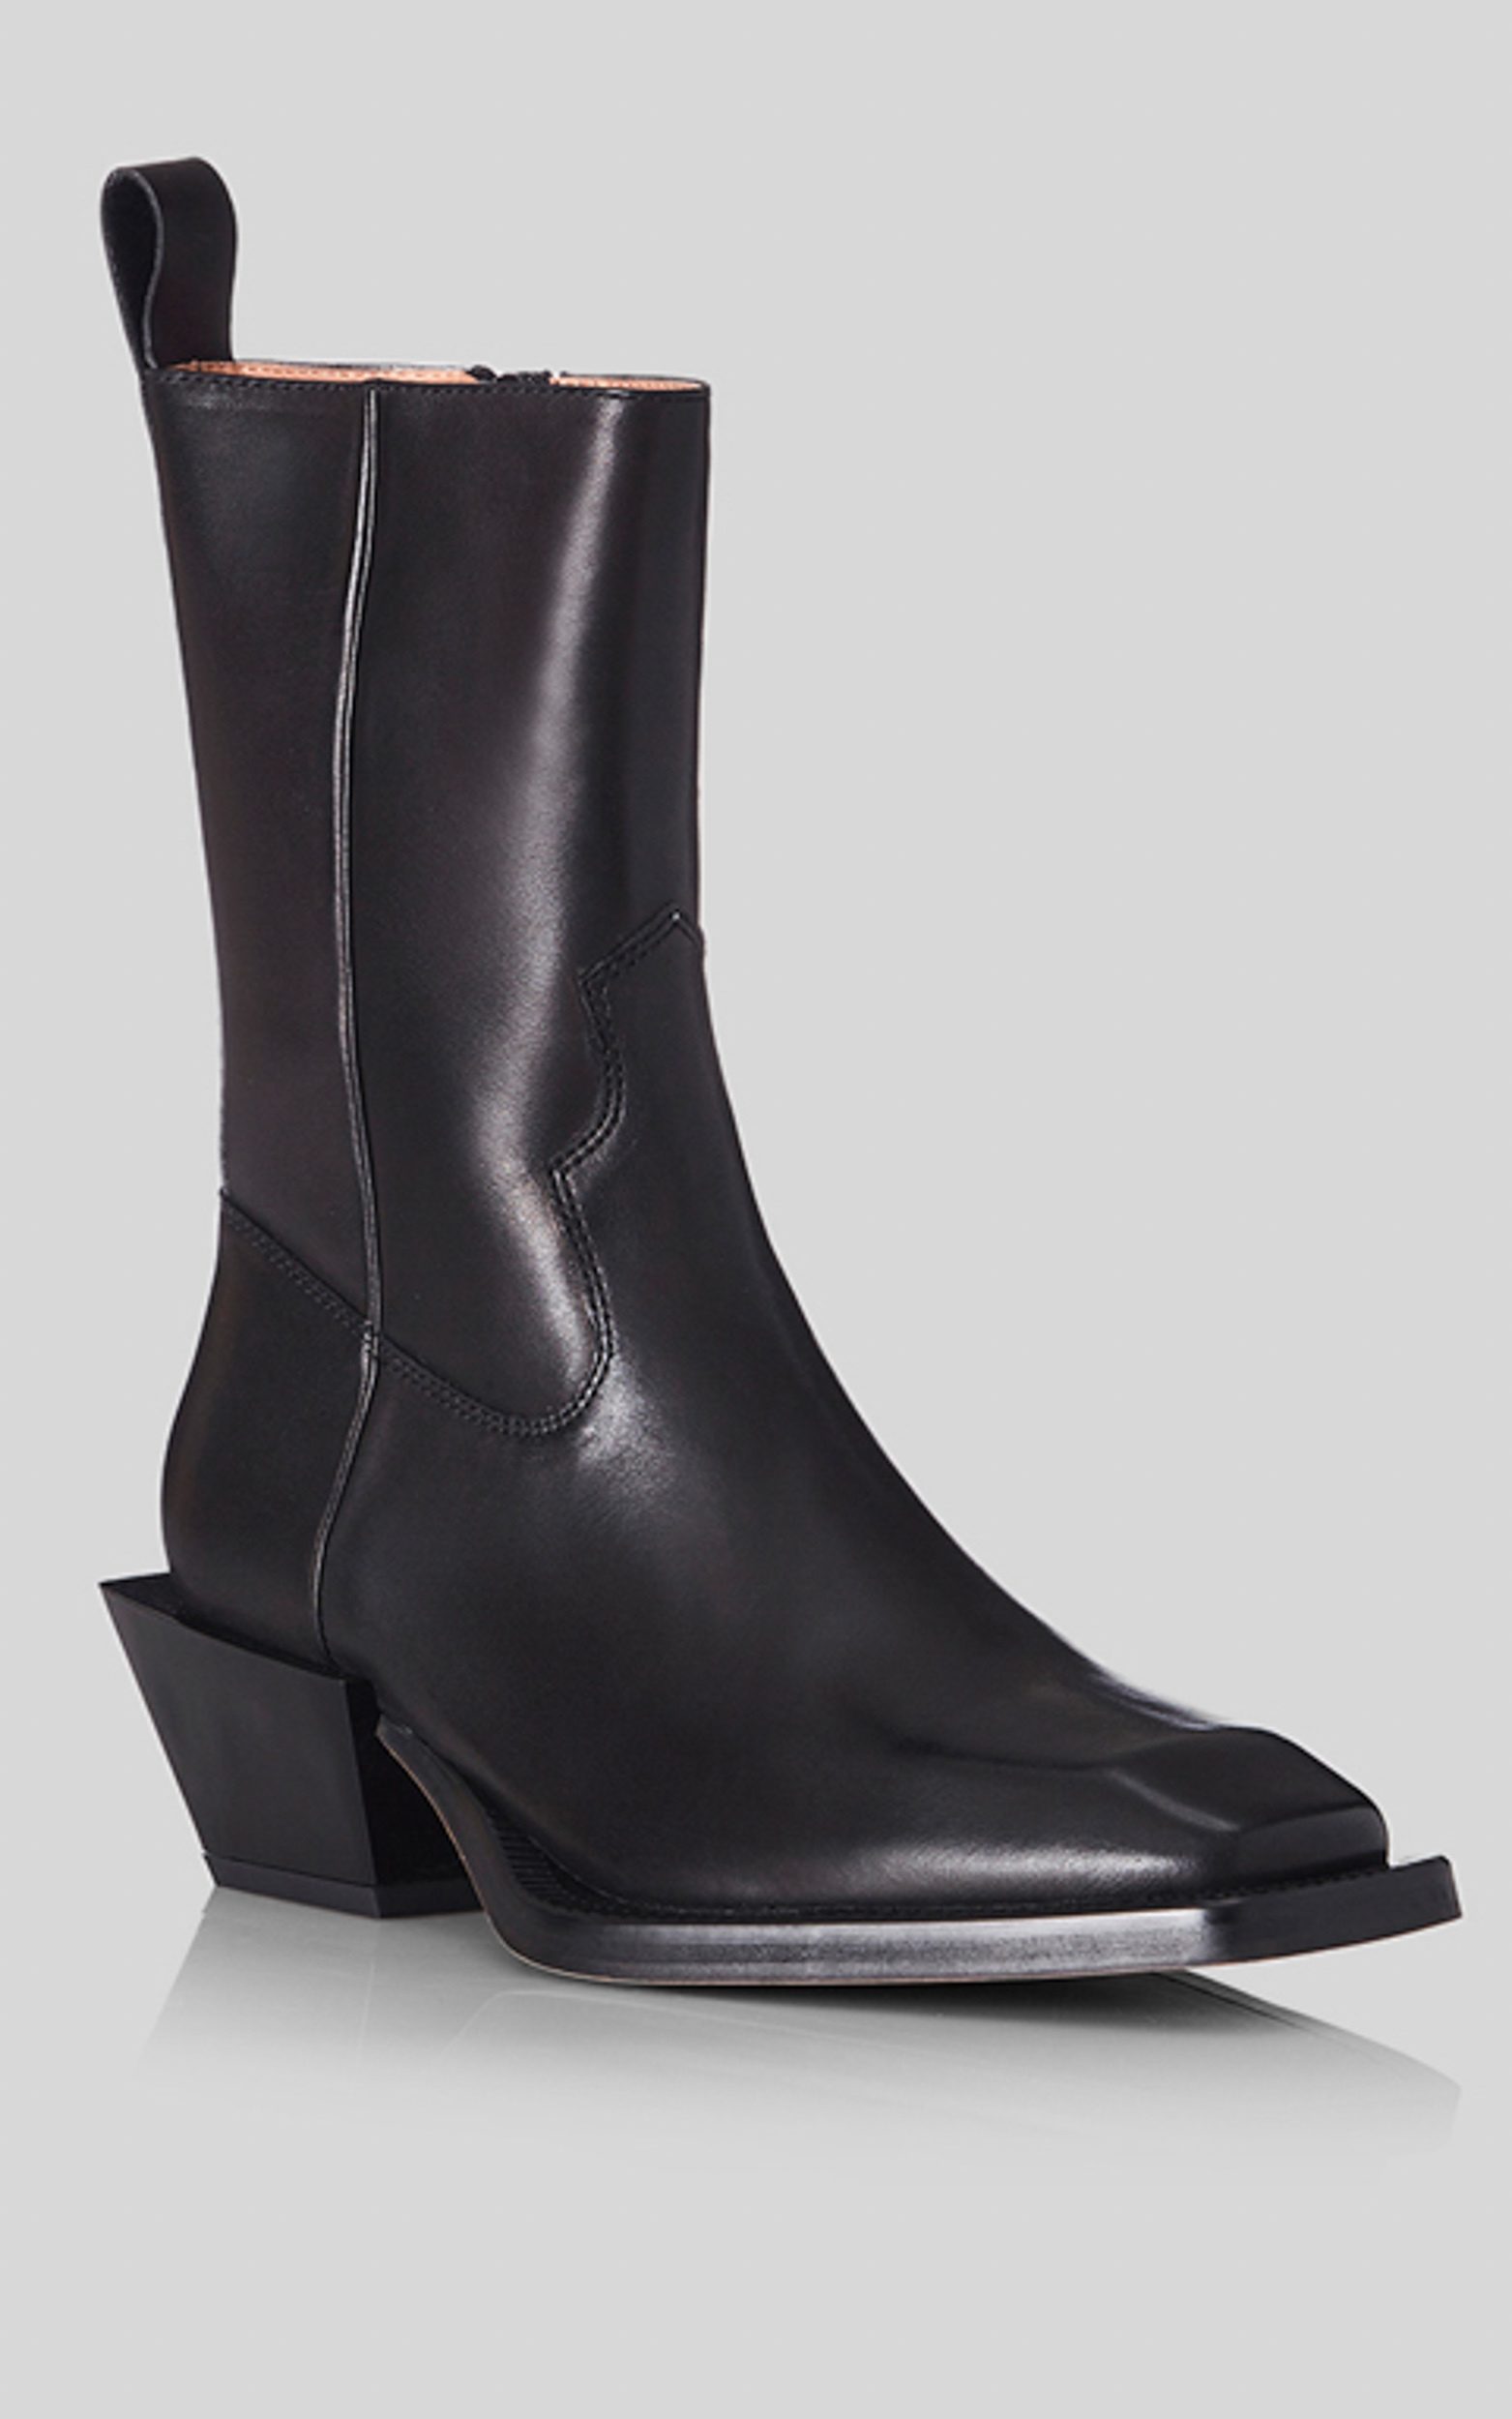 Alias Mae - Penny Boots in Black Leather - 05, BLK1, hi-res image number null